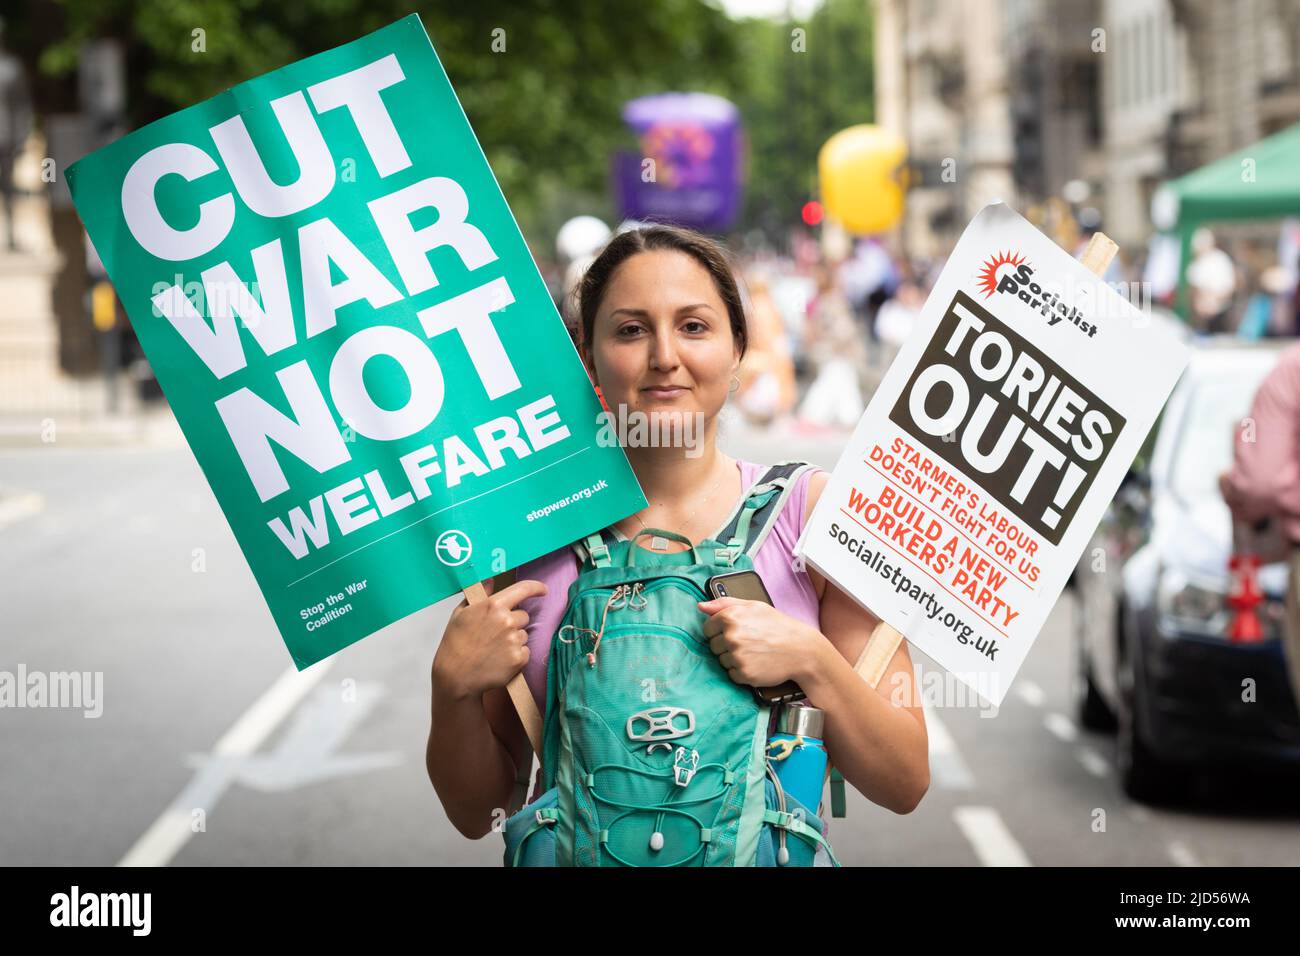 London, UK. 18th June, 2022. A demonstrator poses for a portrait ahead of a Cost Of Living crisis demonstration. Thousands of people take to the streets for a national demonstration. With inflation spiralling out of control the Trades Union Council organised the protest to raise awareness about the cost of living crisis. Credit: Andy Barton/Alamy Live News Stock Photo